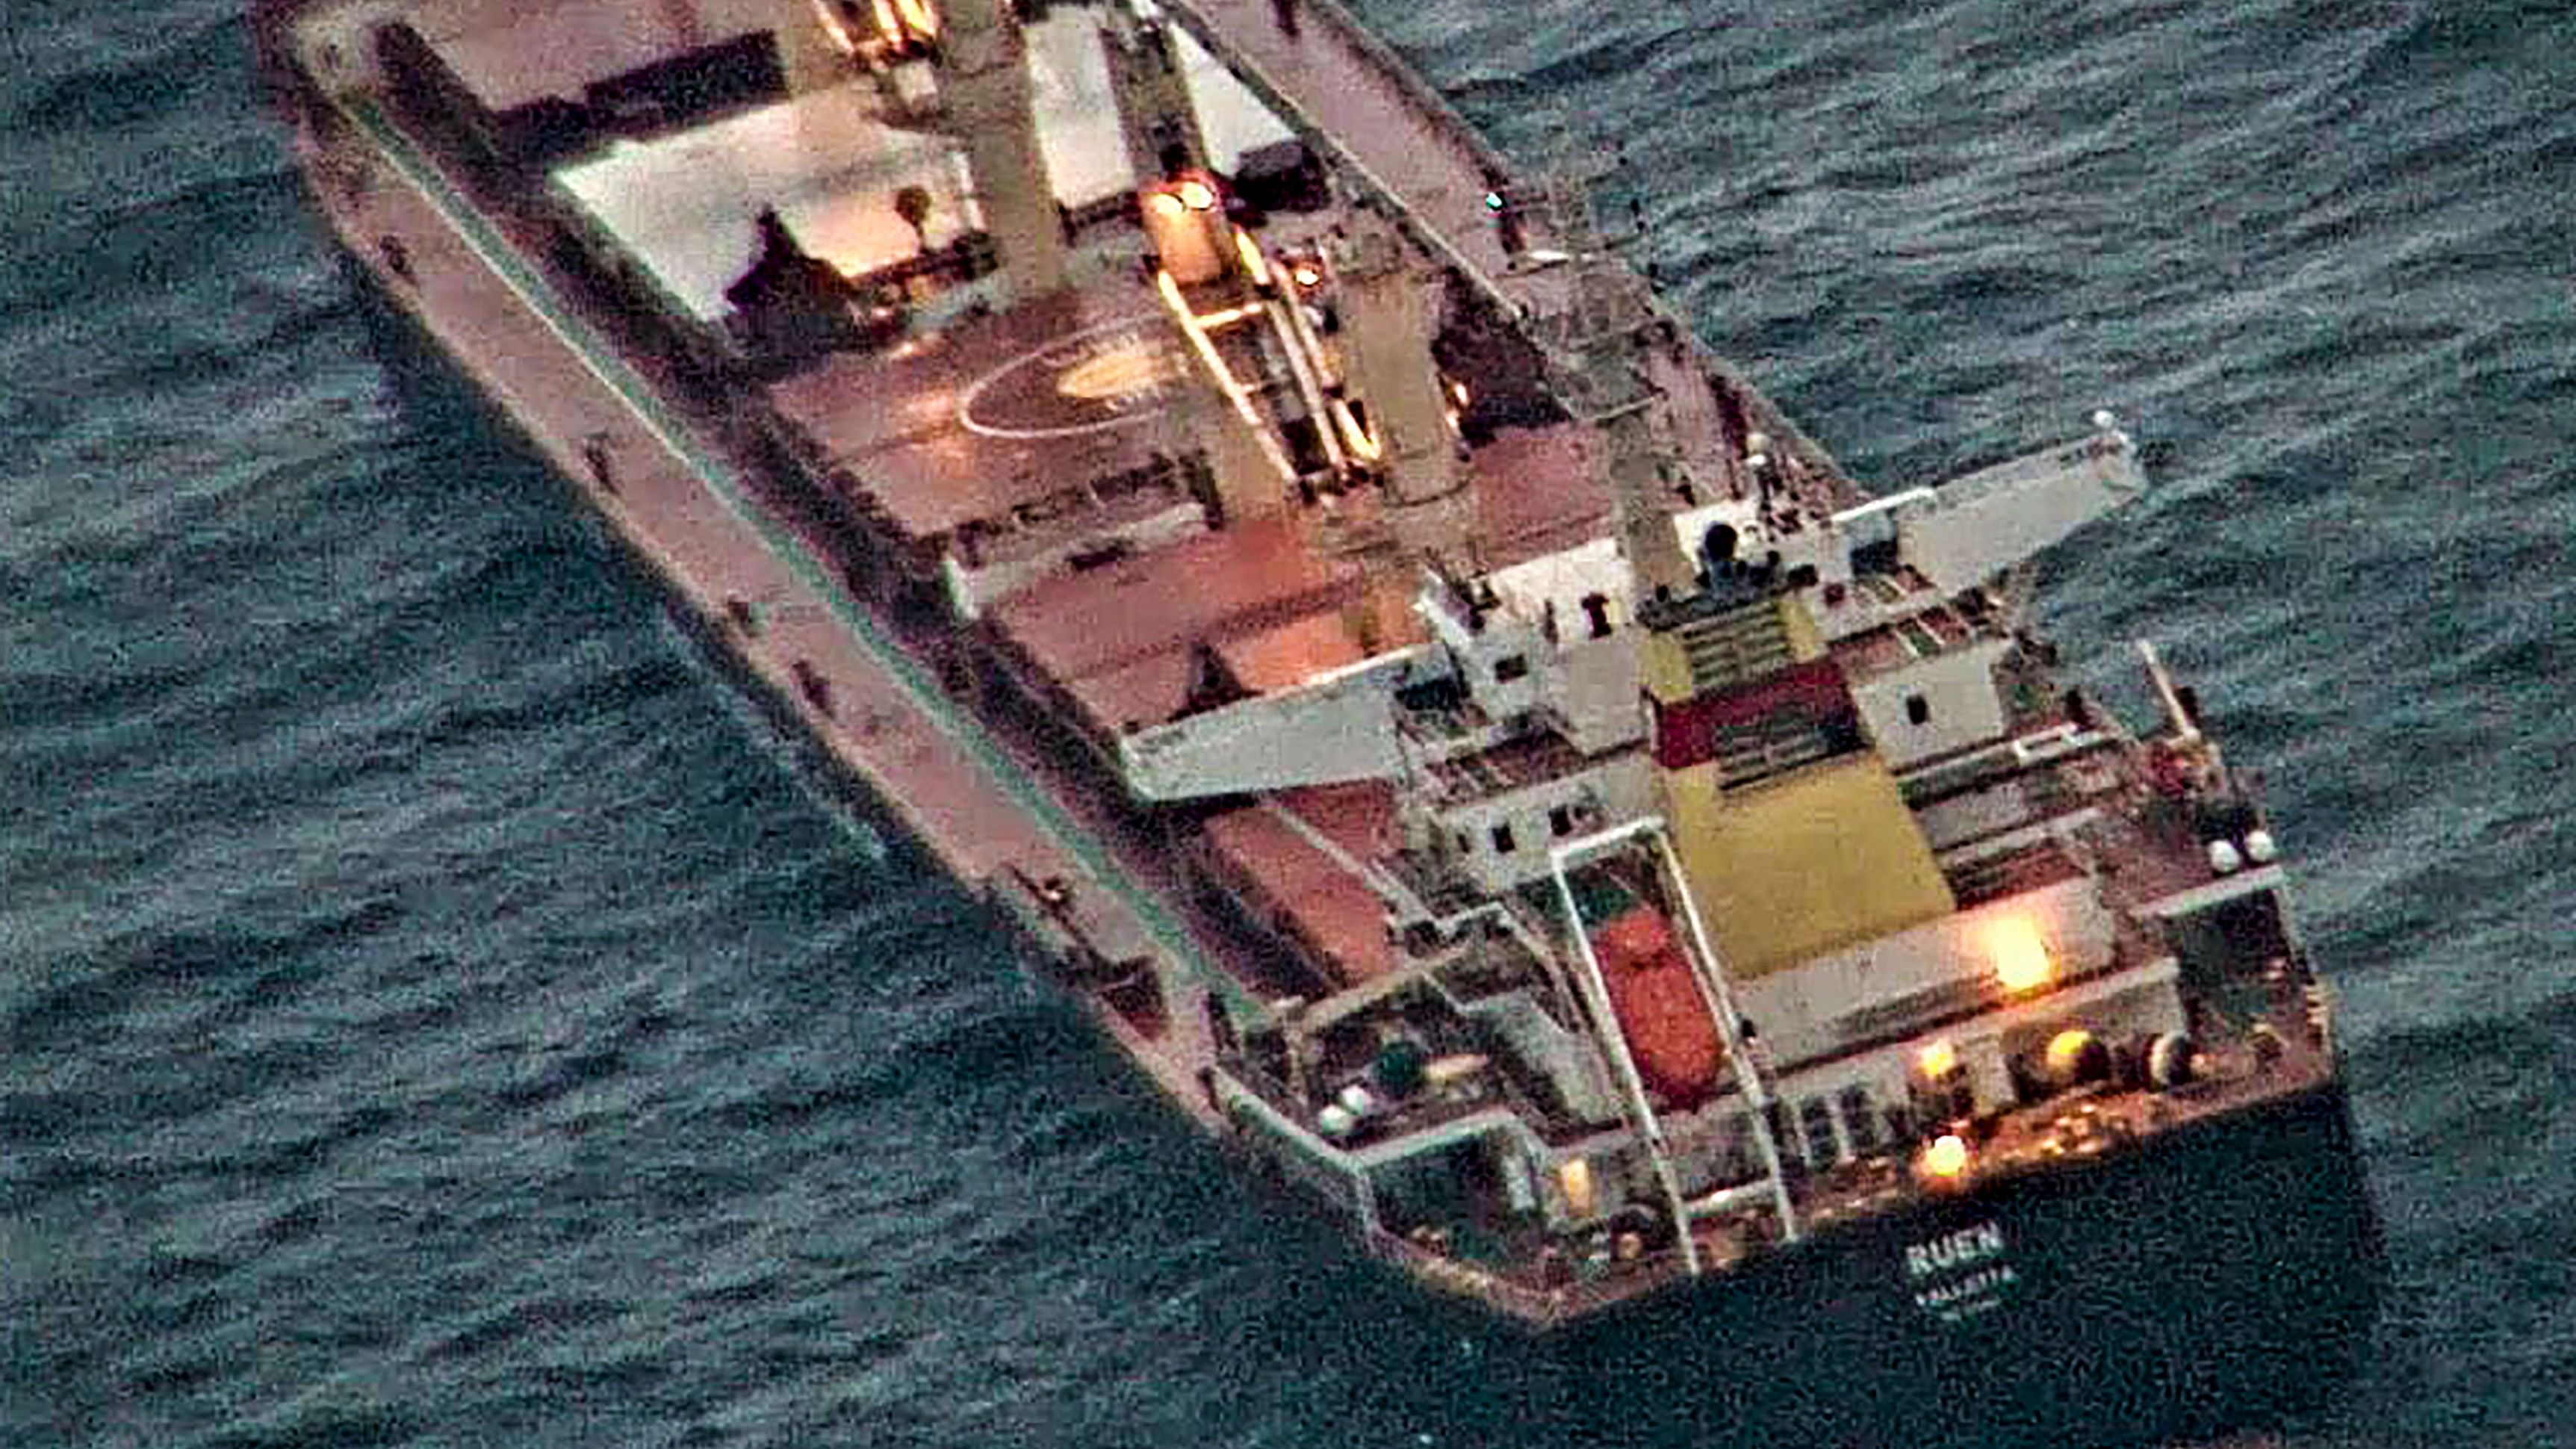 <div class="paragraphs"><p>New Delhi: MV Ruen, a vessel with 18 crew onboard, that had sent a Mayday message indicating boarding by approx six unknown personnel.</p></div>